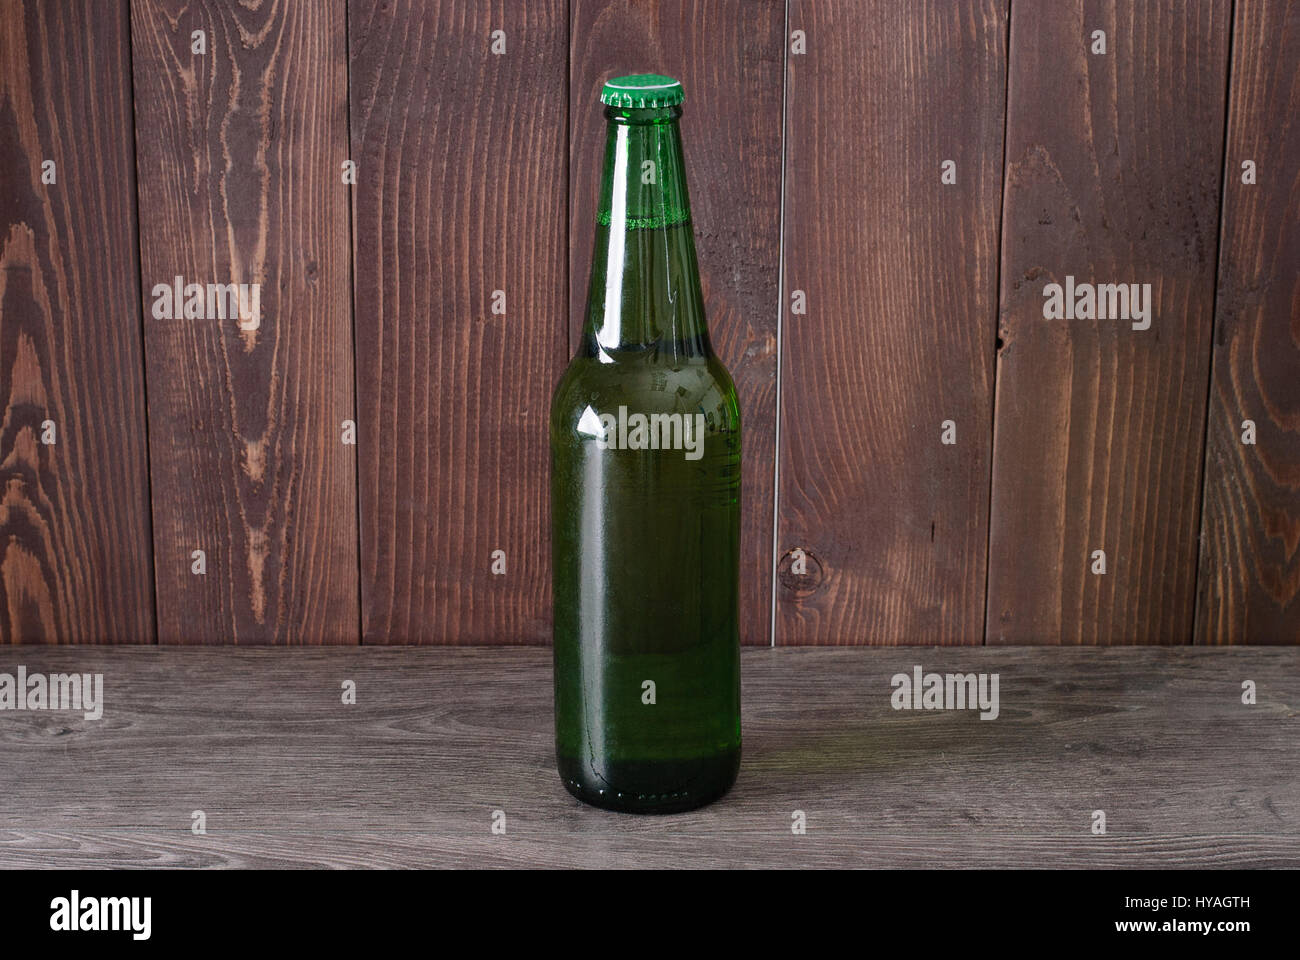 bottle of beer on a wooden background Stock Photo